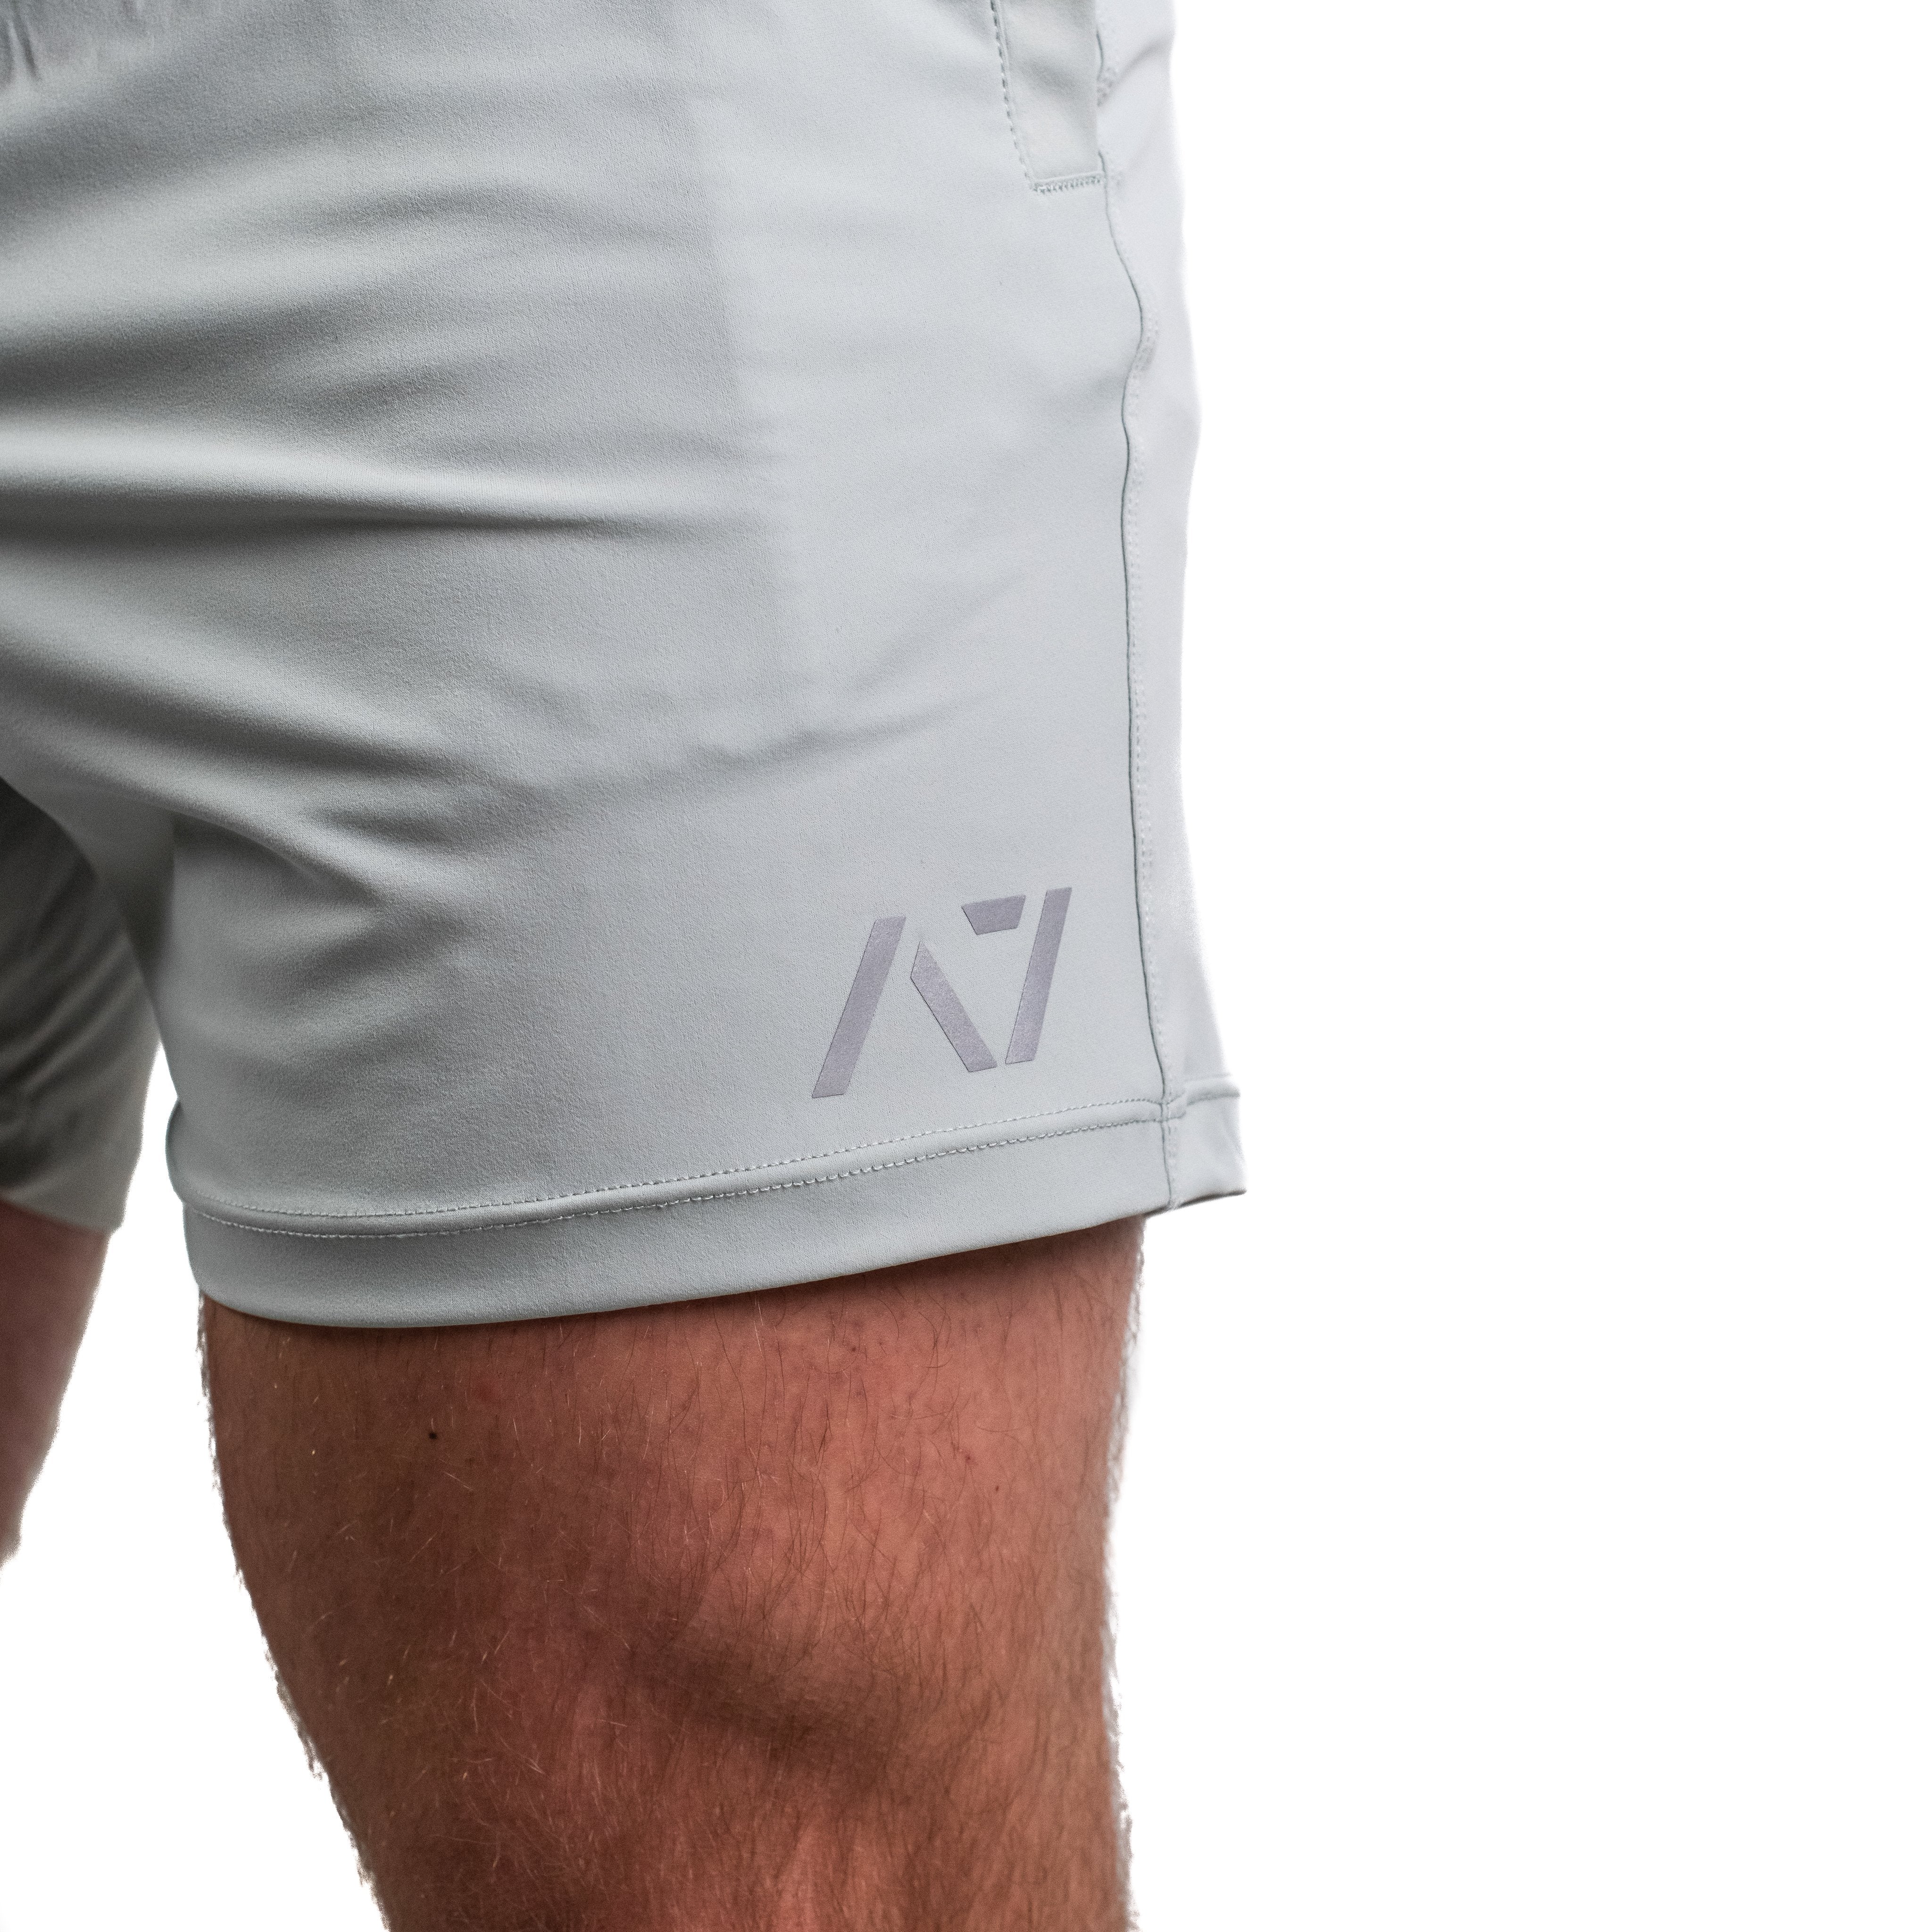 360-GO KWD shorts were created to provide the flexibility for all the movements in your training while offering the comfort and fit you have come to love through our KWD shorts. These shorts offer a slightly shorter length to accentuate the muscles of your upper leg along with 360 degrees of stretch in all angles and allow you to remain comfortable without limiting any movement in both training and life environments. 